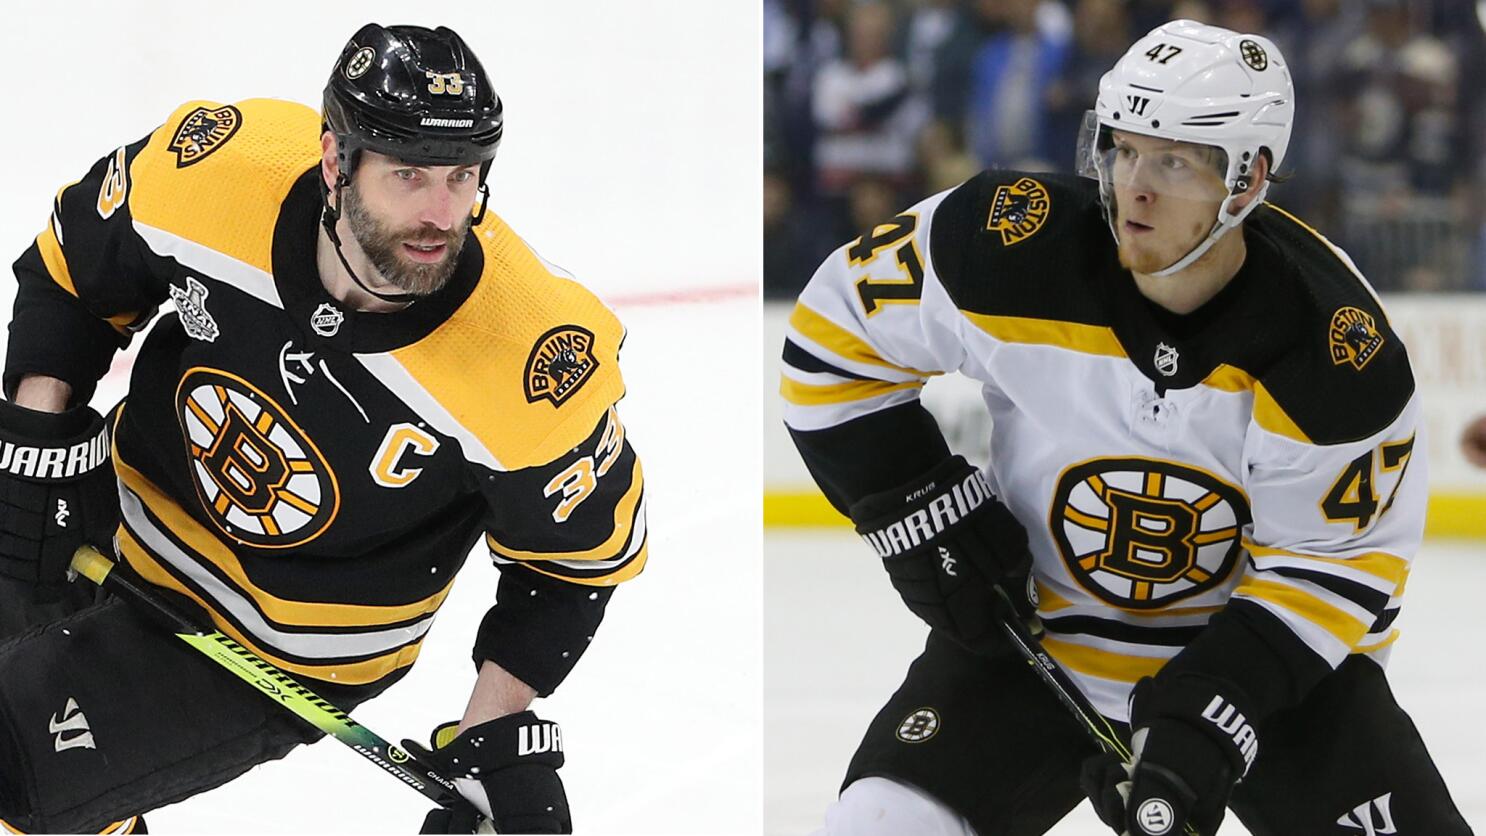 Column: Zdeno Chara and Torey Krug fuel Bruins' Stanley Cup hopes